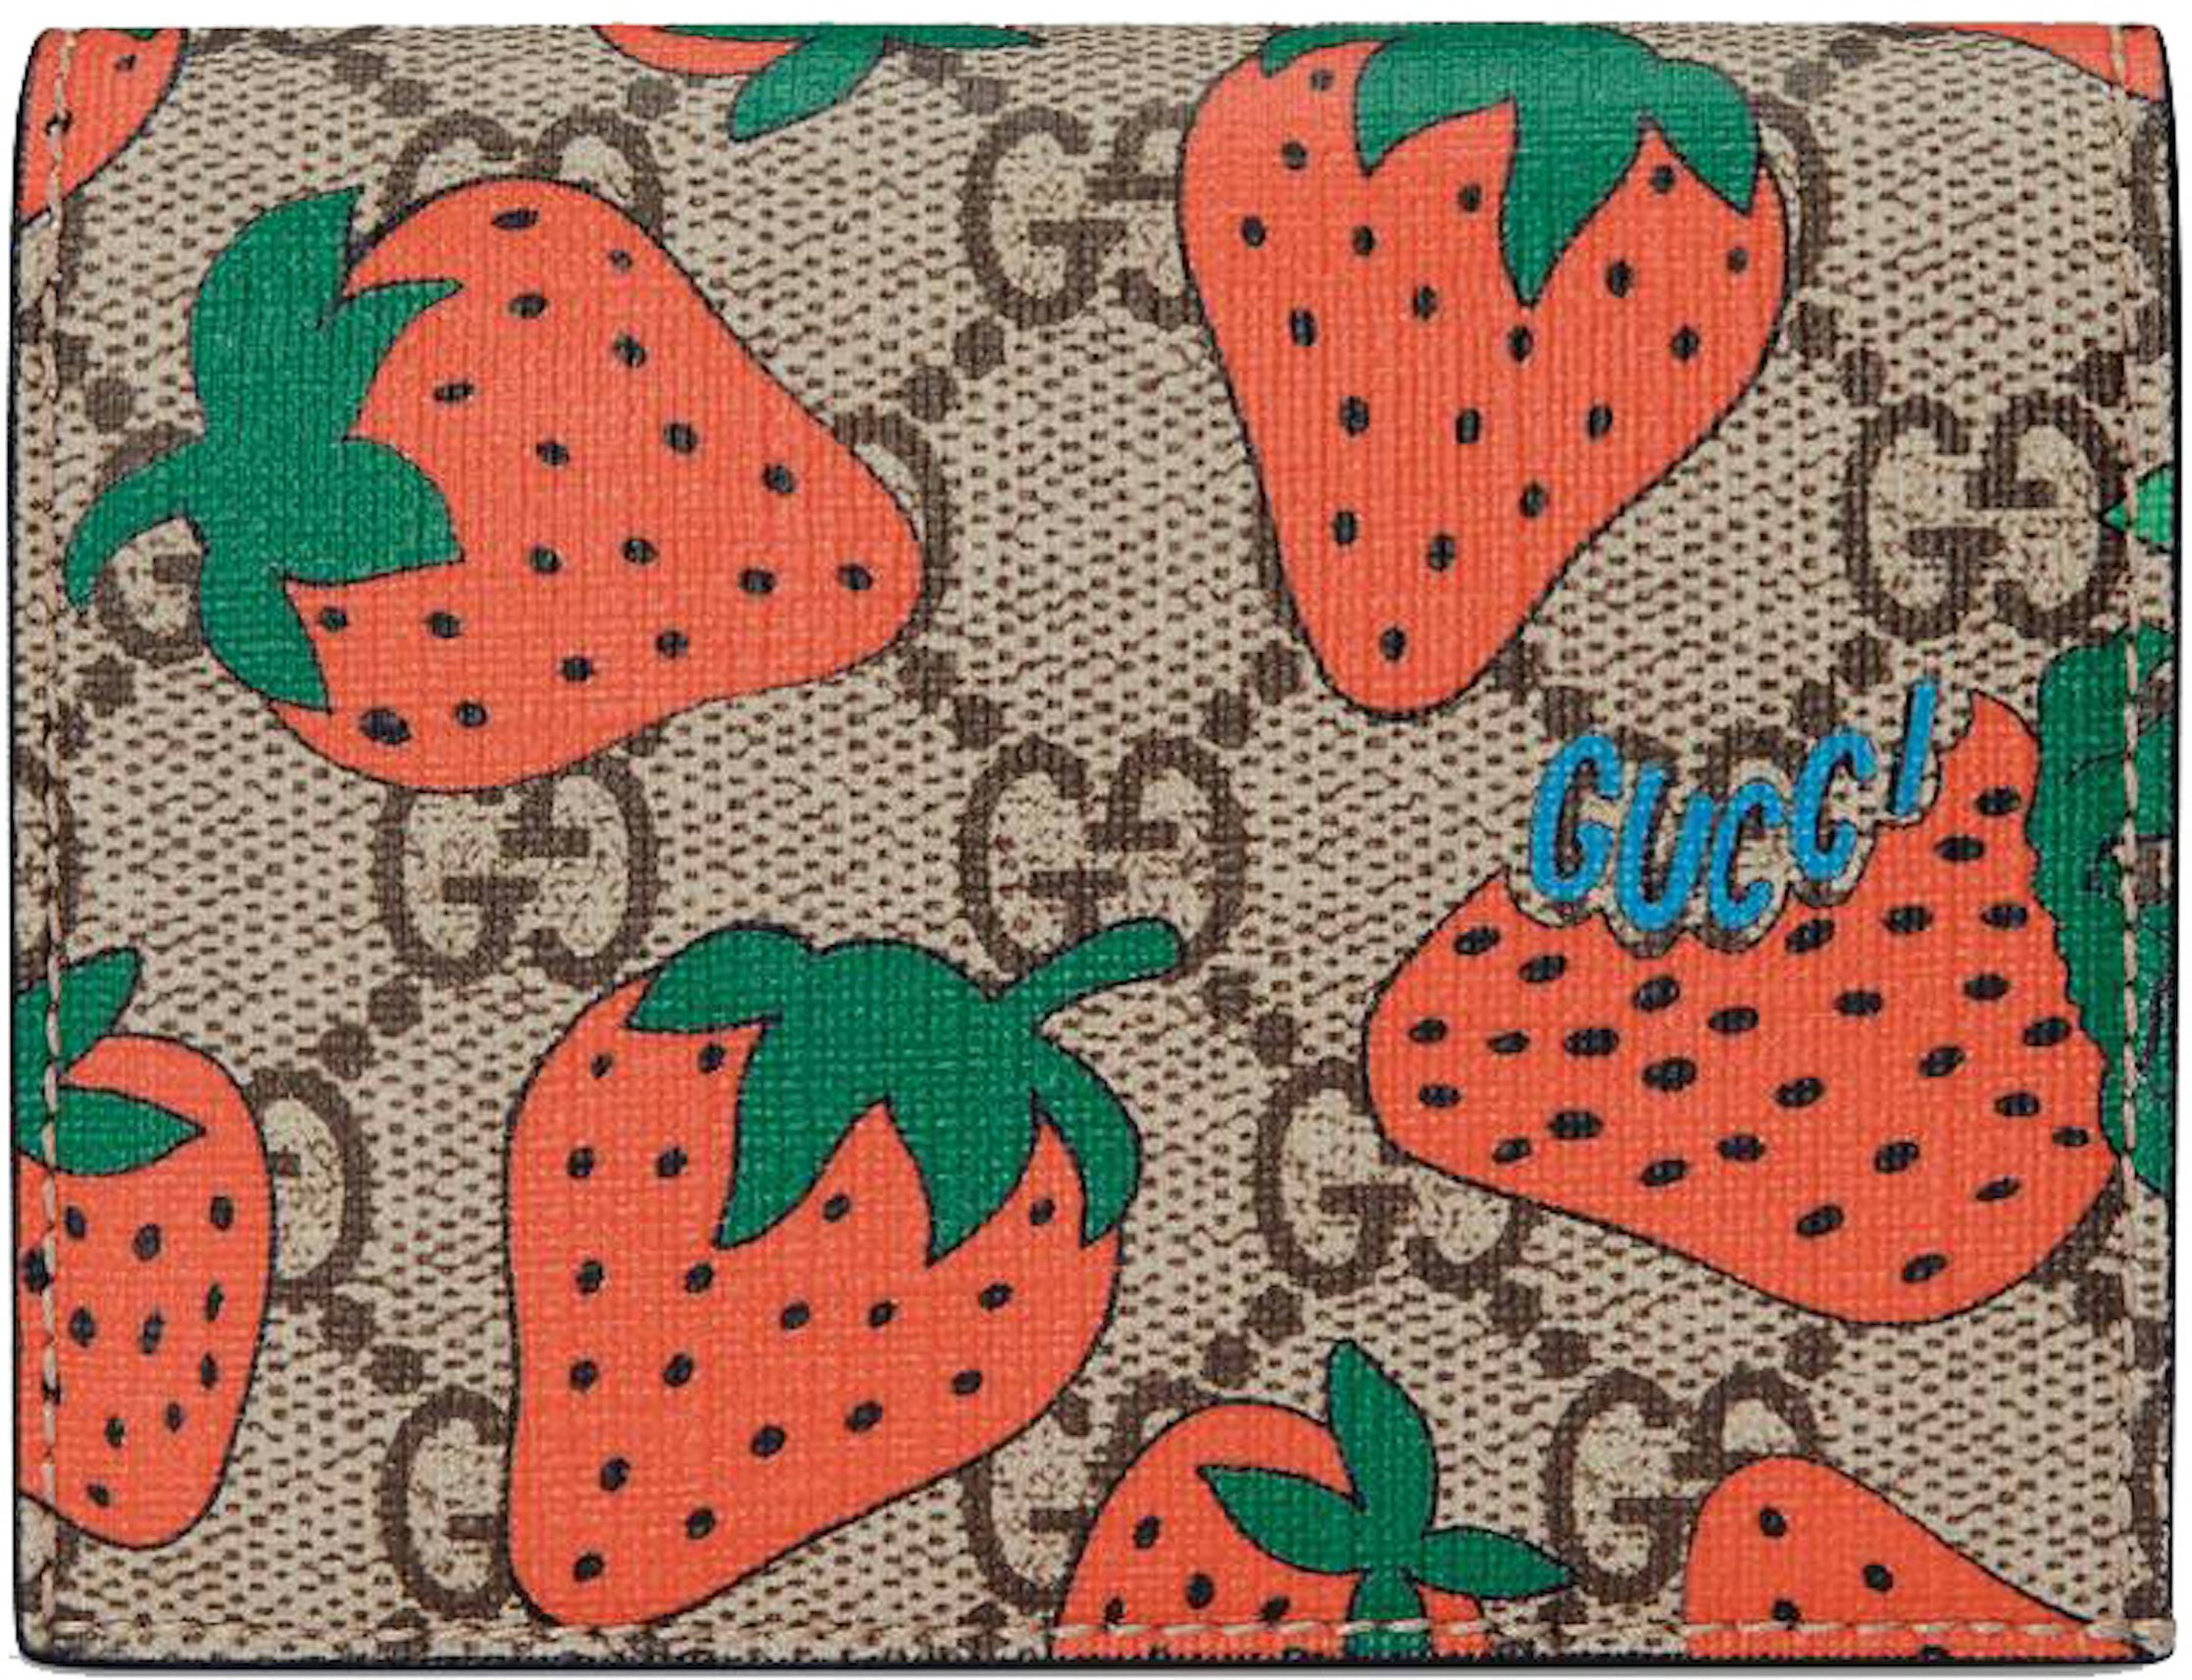 Gucci Authentic GG Limited Edition Strawberry Supreme Iphone X XS